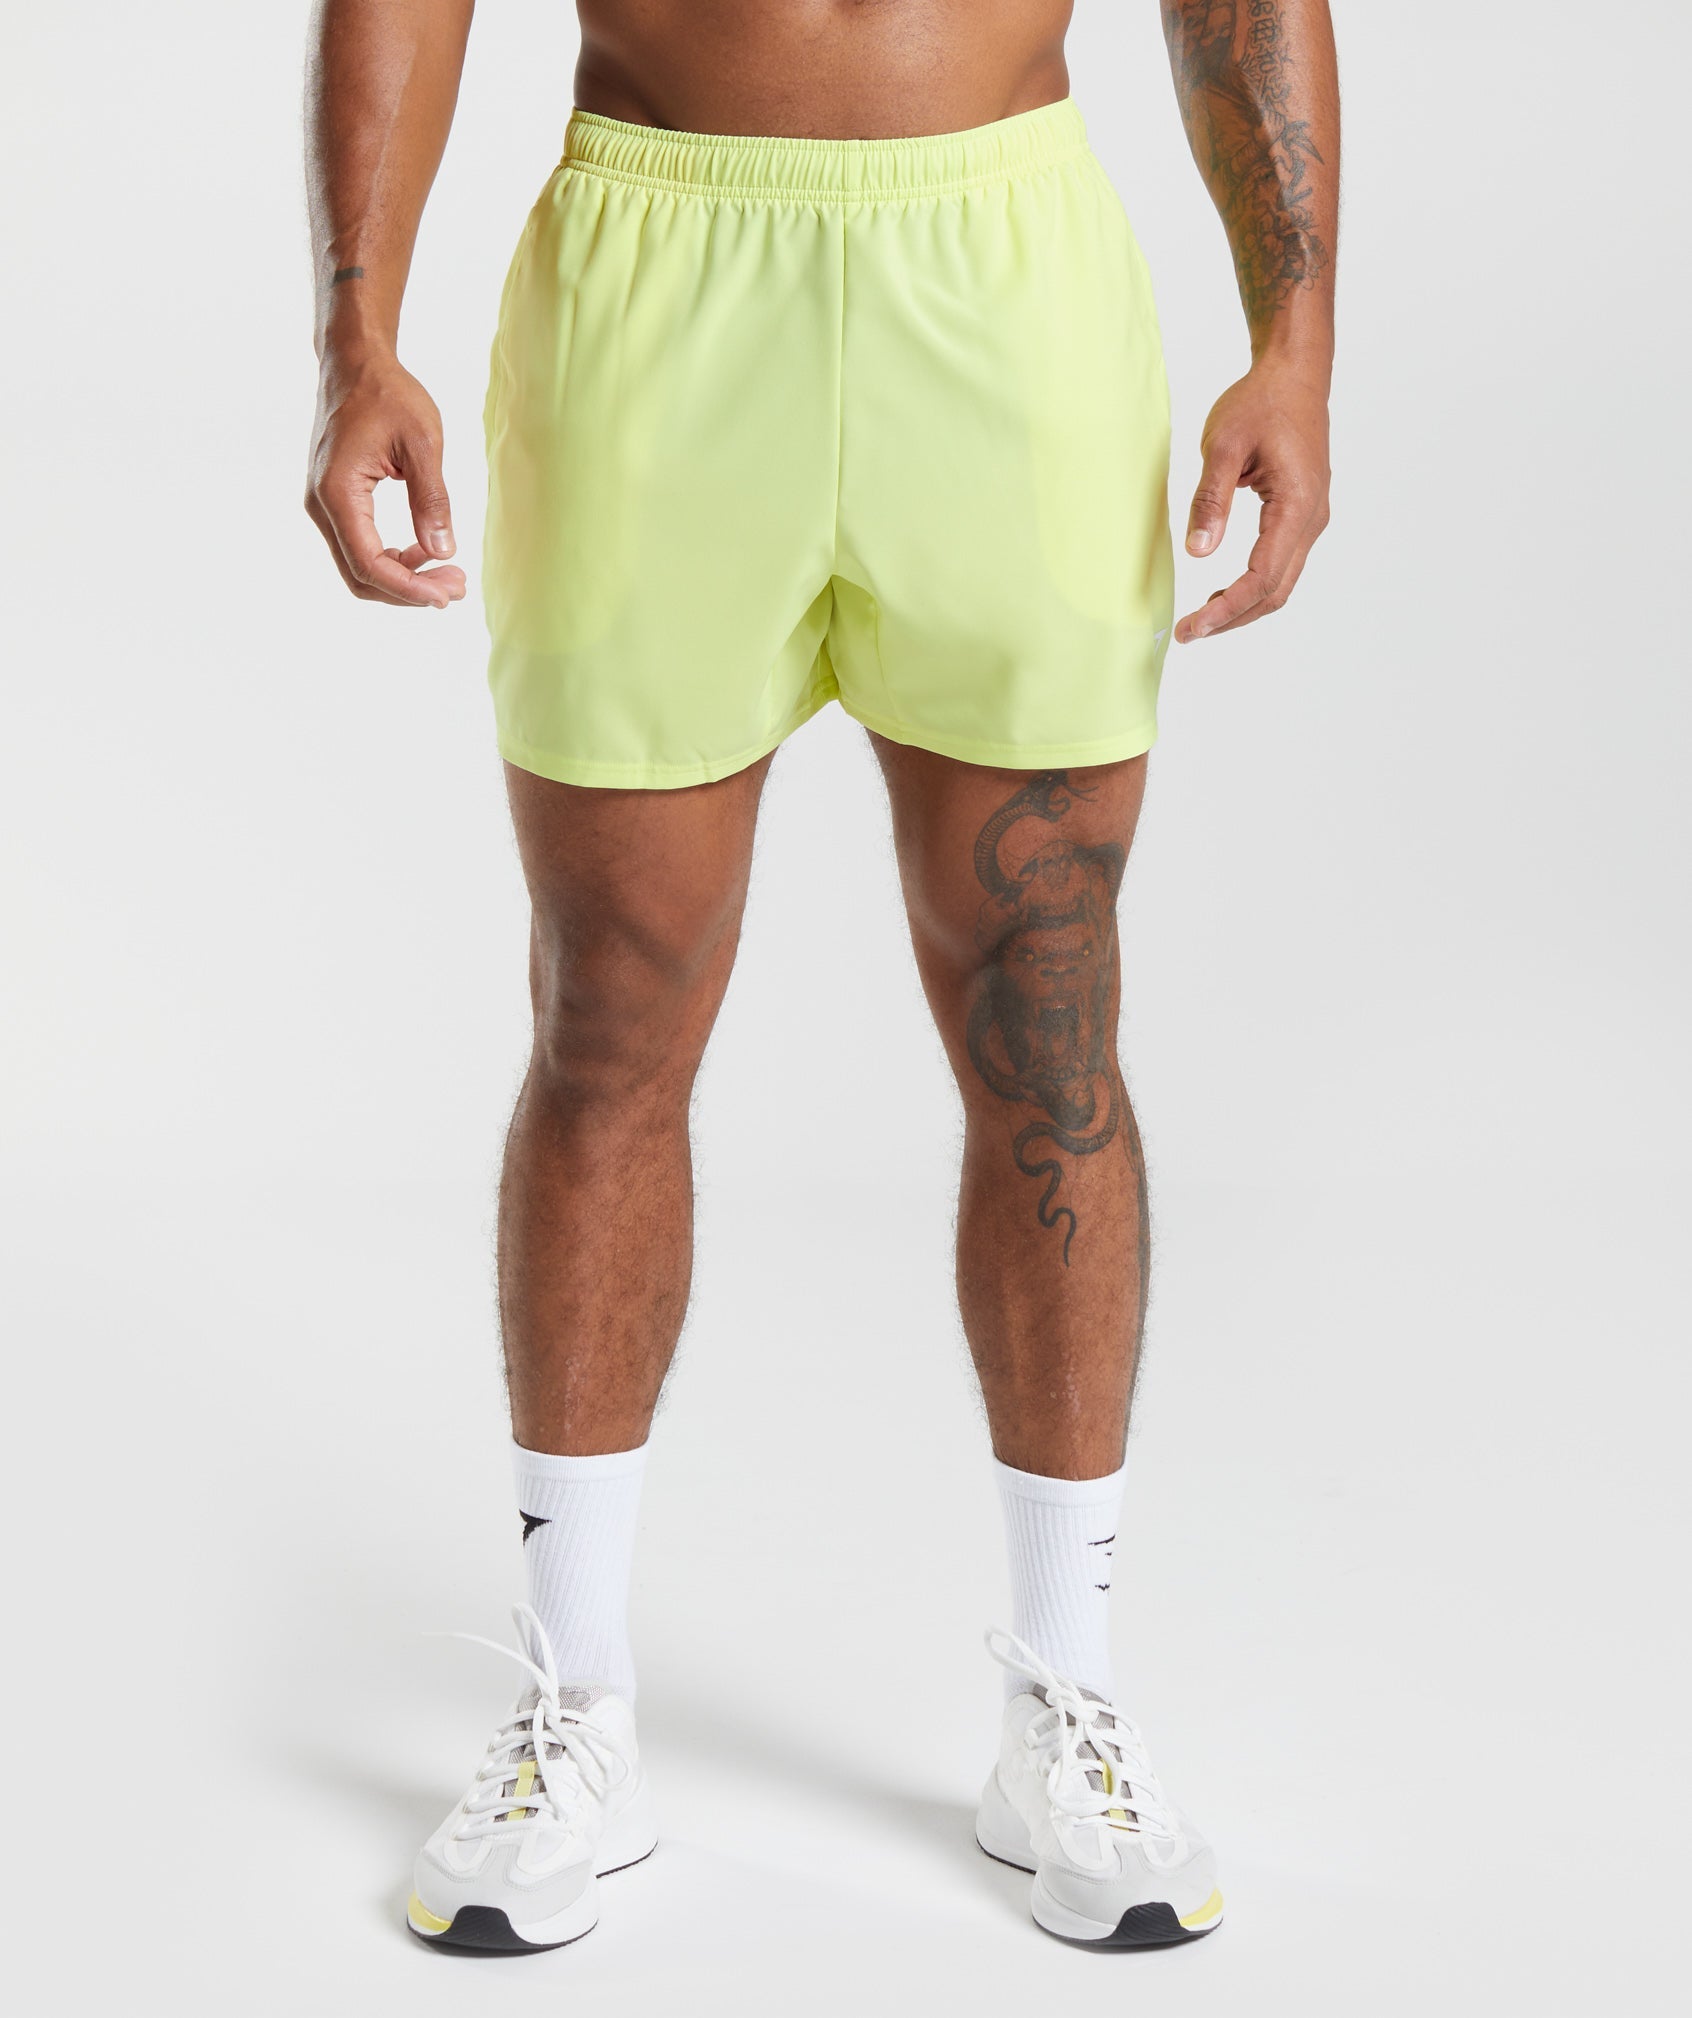 Arrival 5" Shorts in Firefly Green